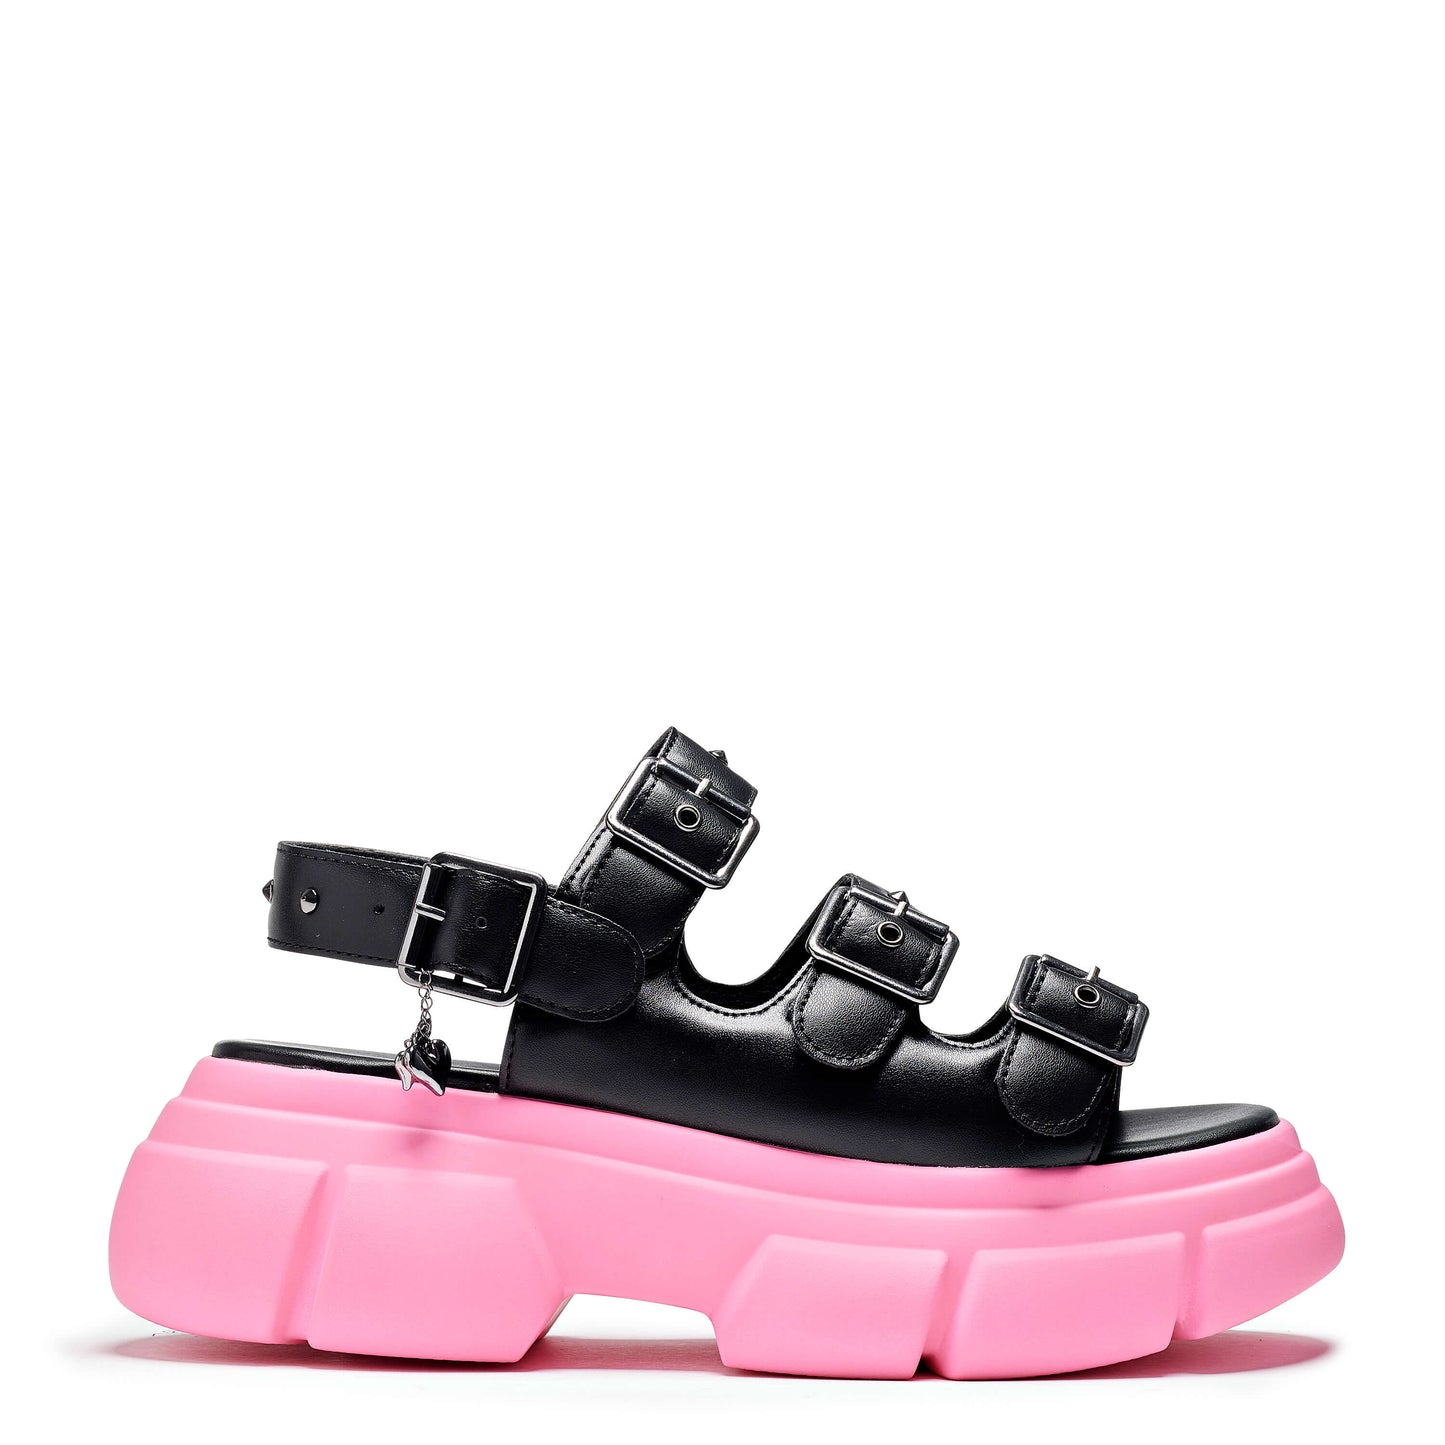 Sticky Secrets Chunky Pink Sandals - Sandals - KOI Footwear - Pink - Side View